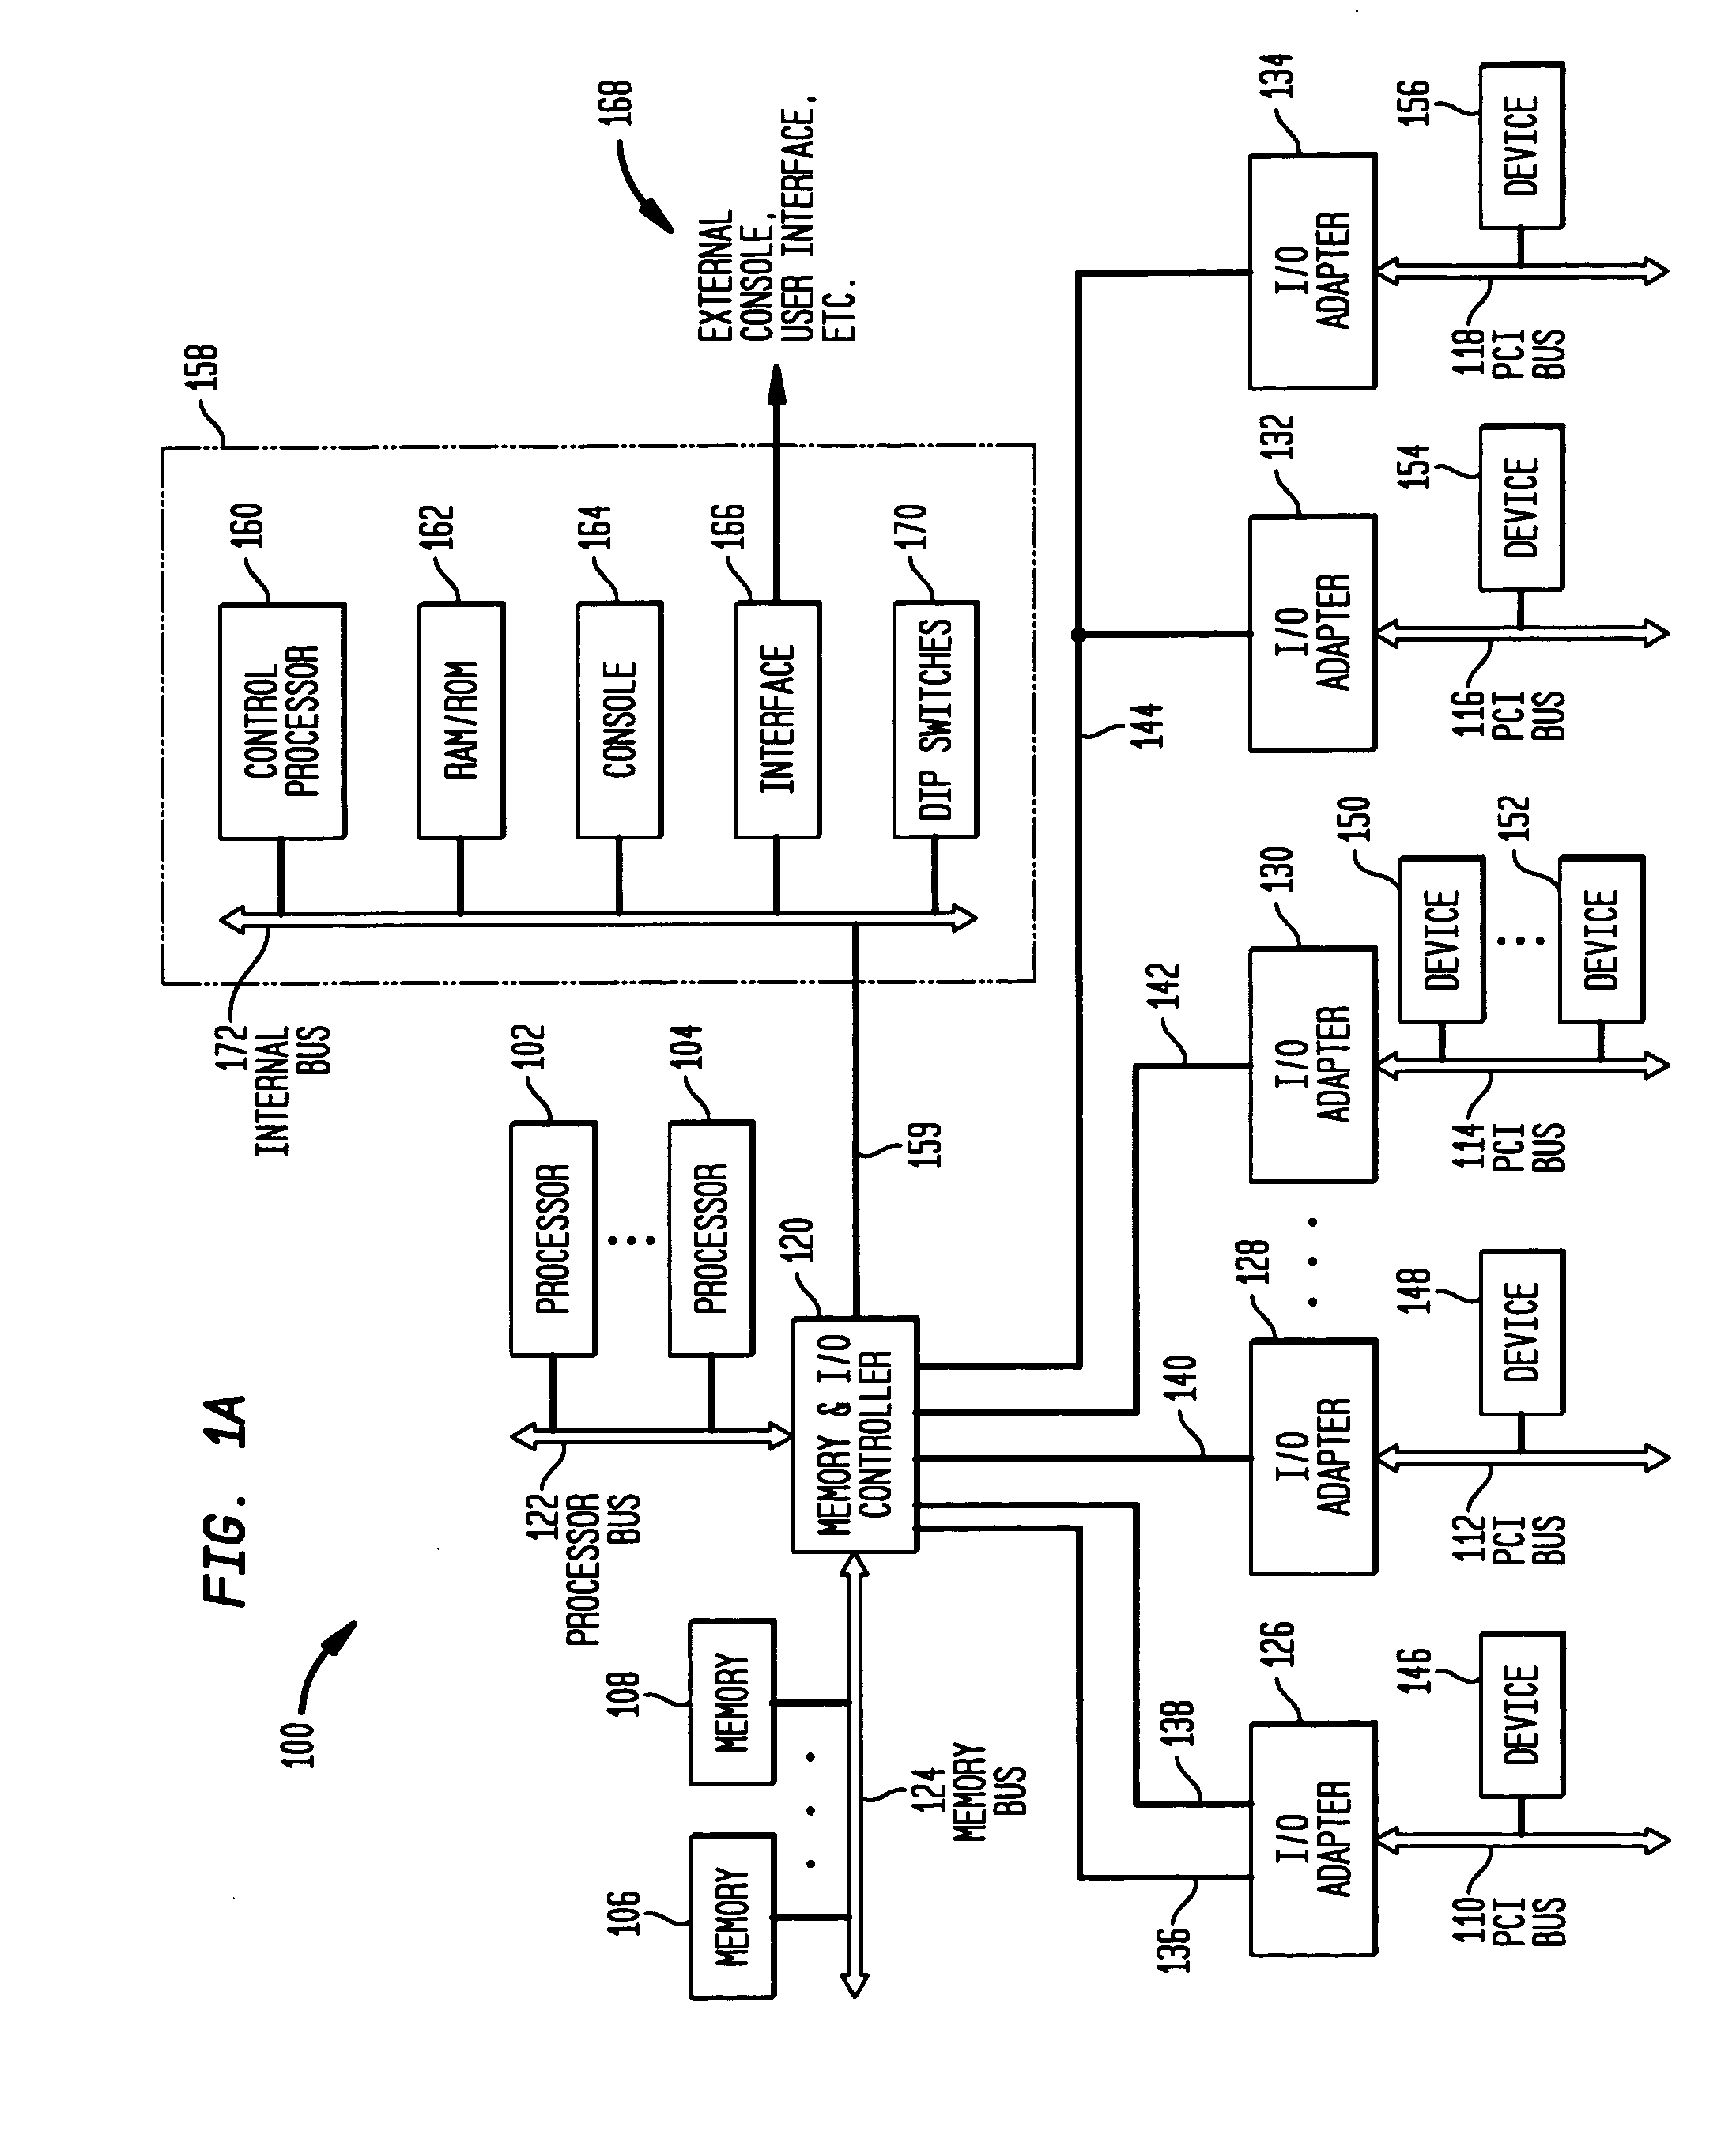 Bus clock frequency management based on device bandwidth characteristics